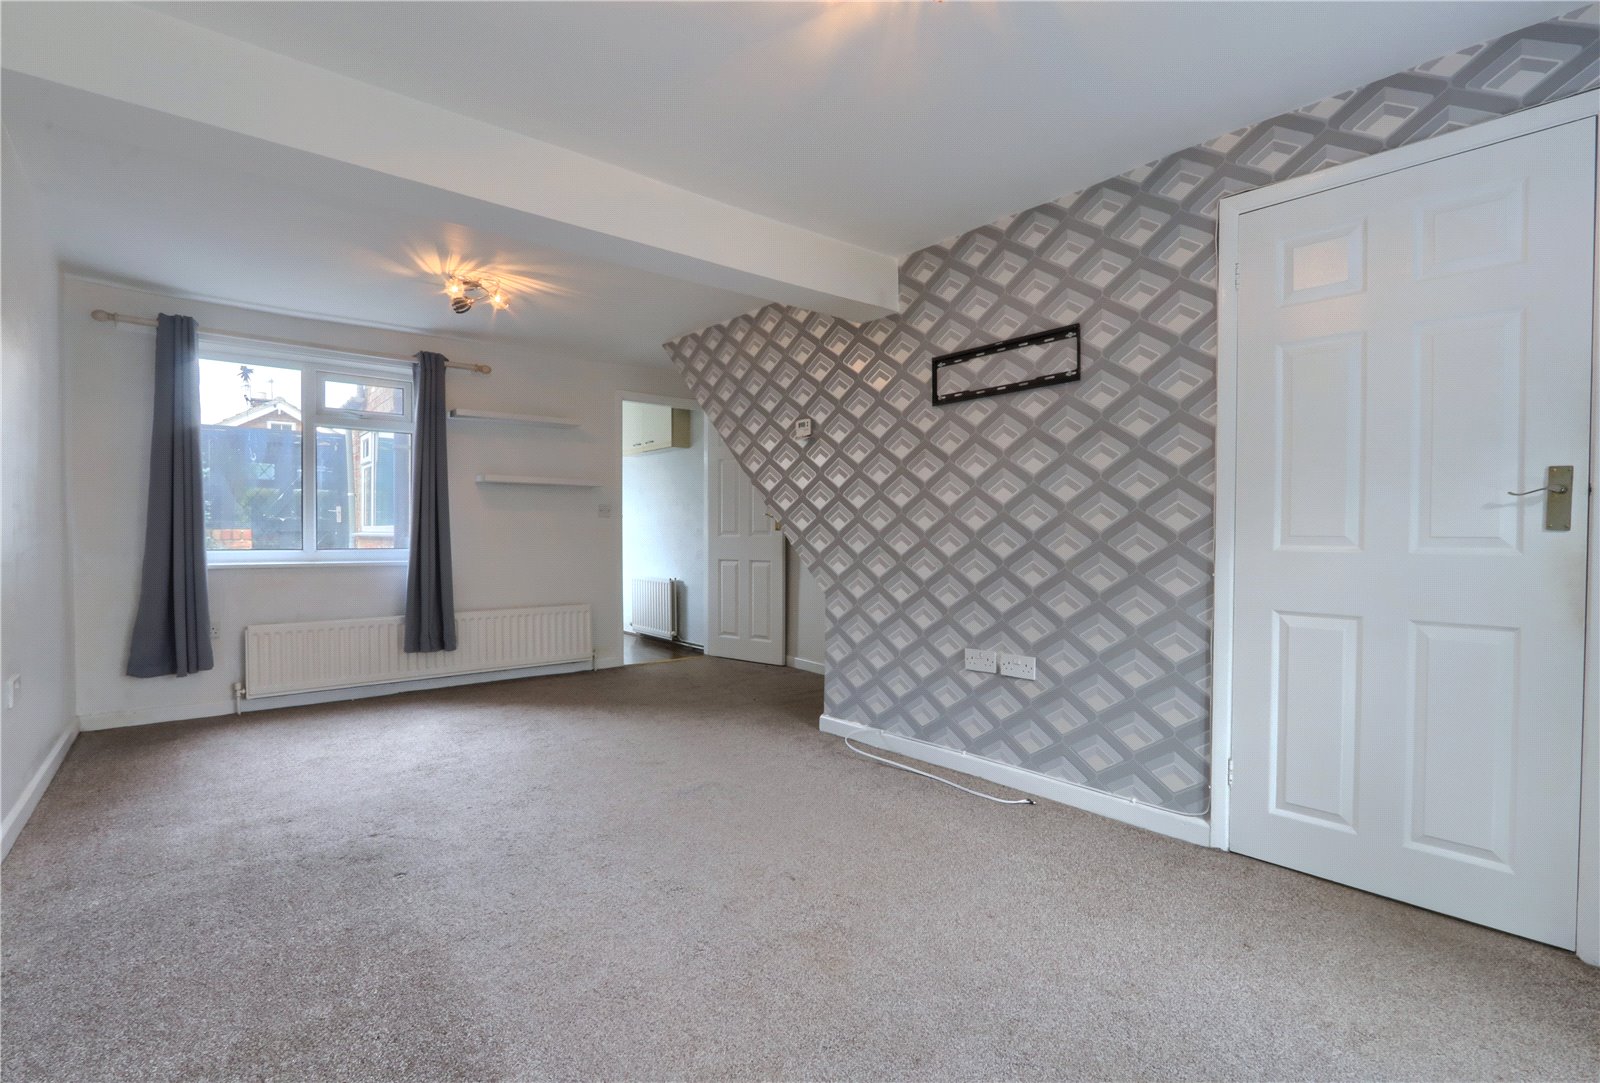 2 bed house for sale in High Street, Normanby  - Property Image 2